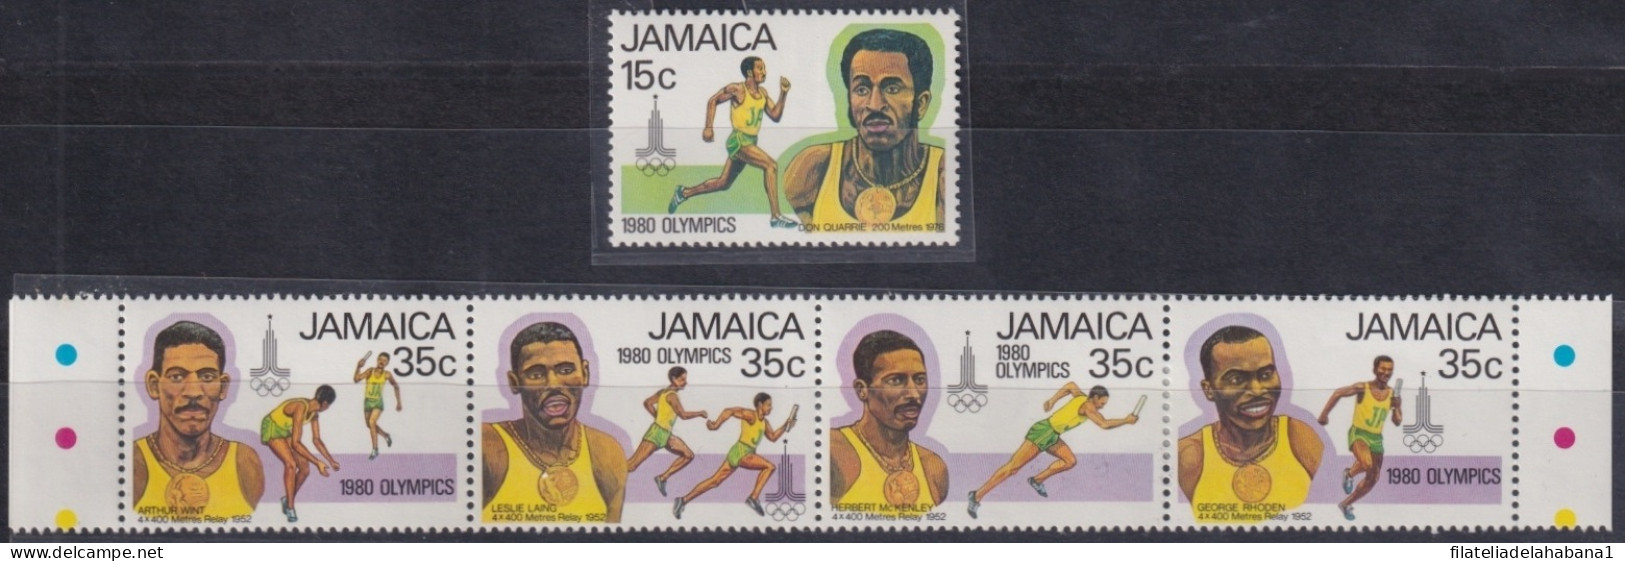 F-EX50105 JAMAICA MNH 1980 MOSCOW OLYMPIC GAMES ATHLETICS ATLETISMO.                      - Estate 1980: Mosca